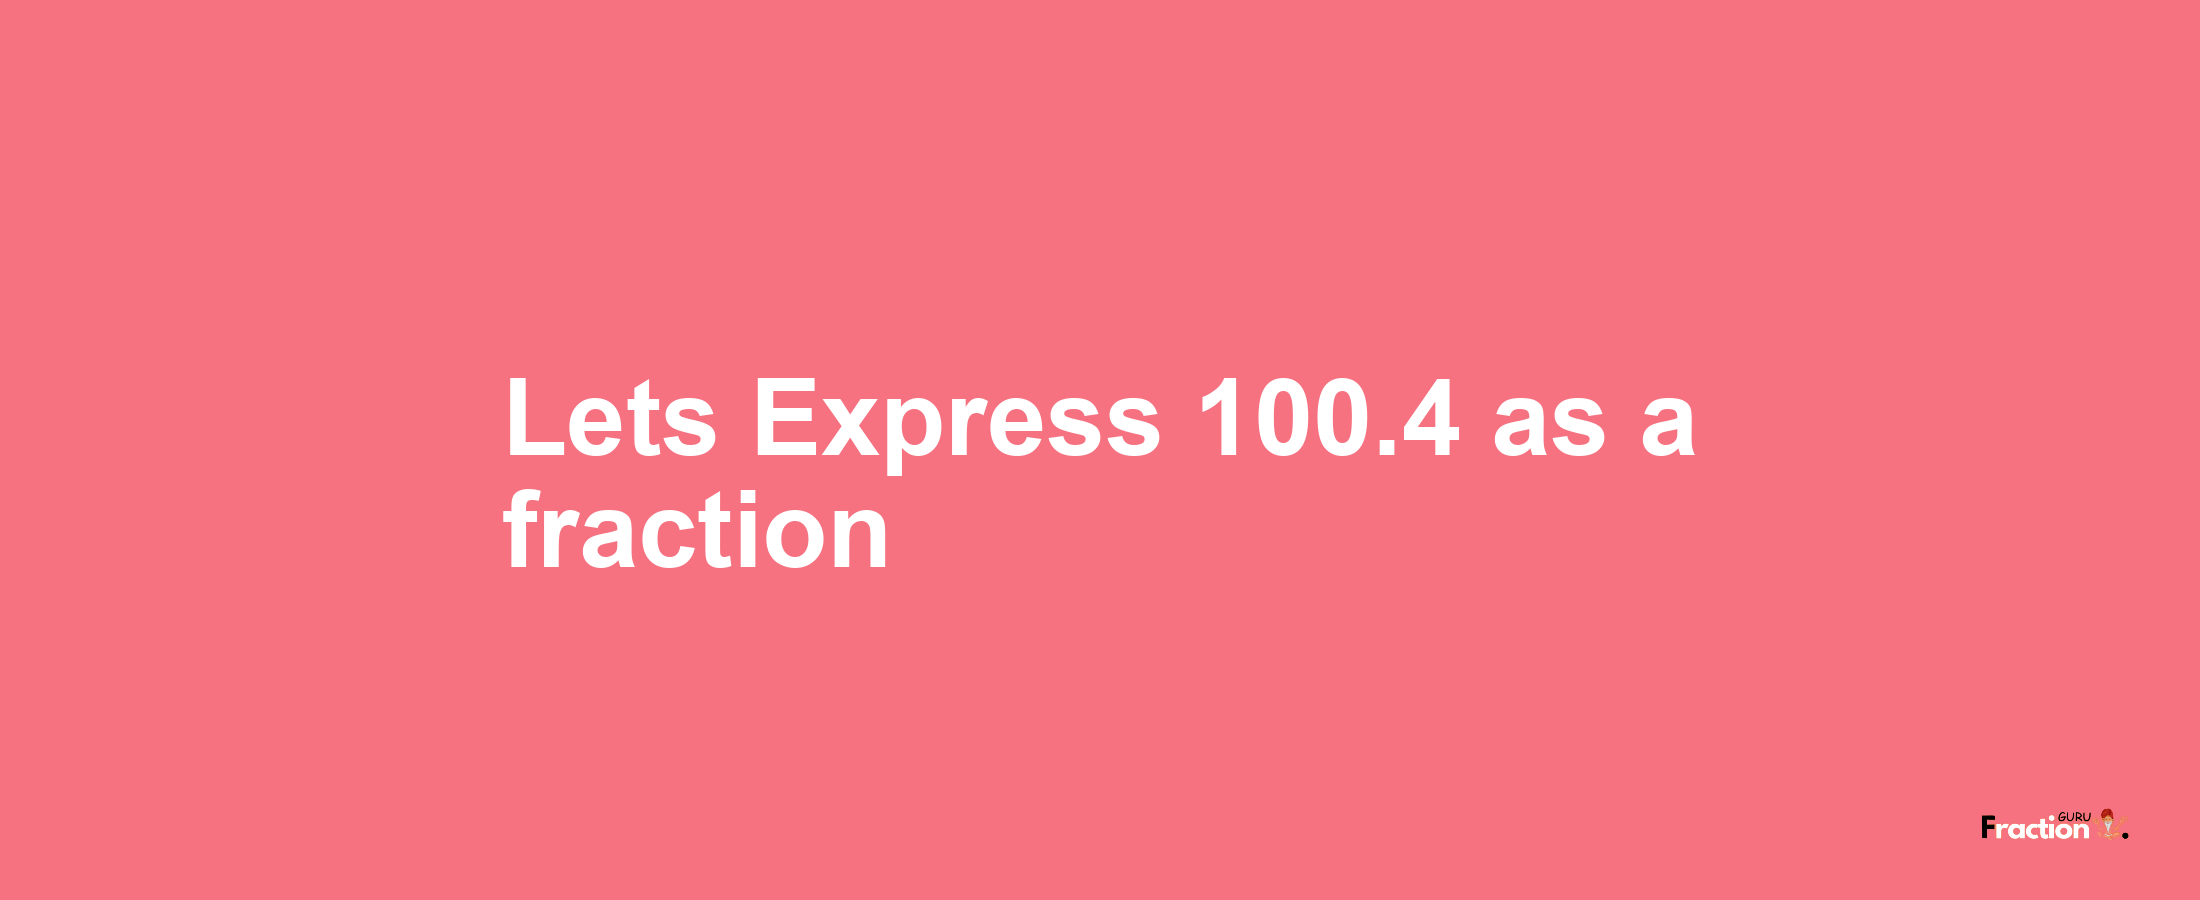 Lets Express 100.4 as afraction